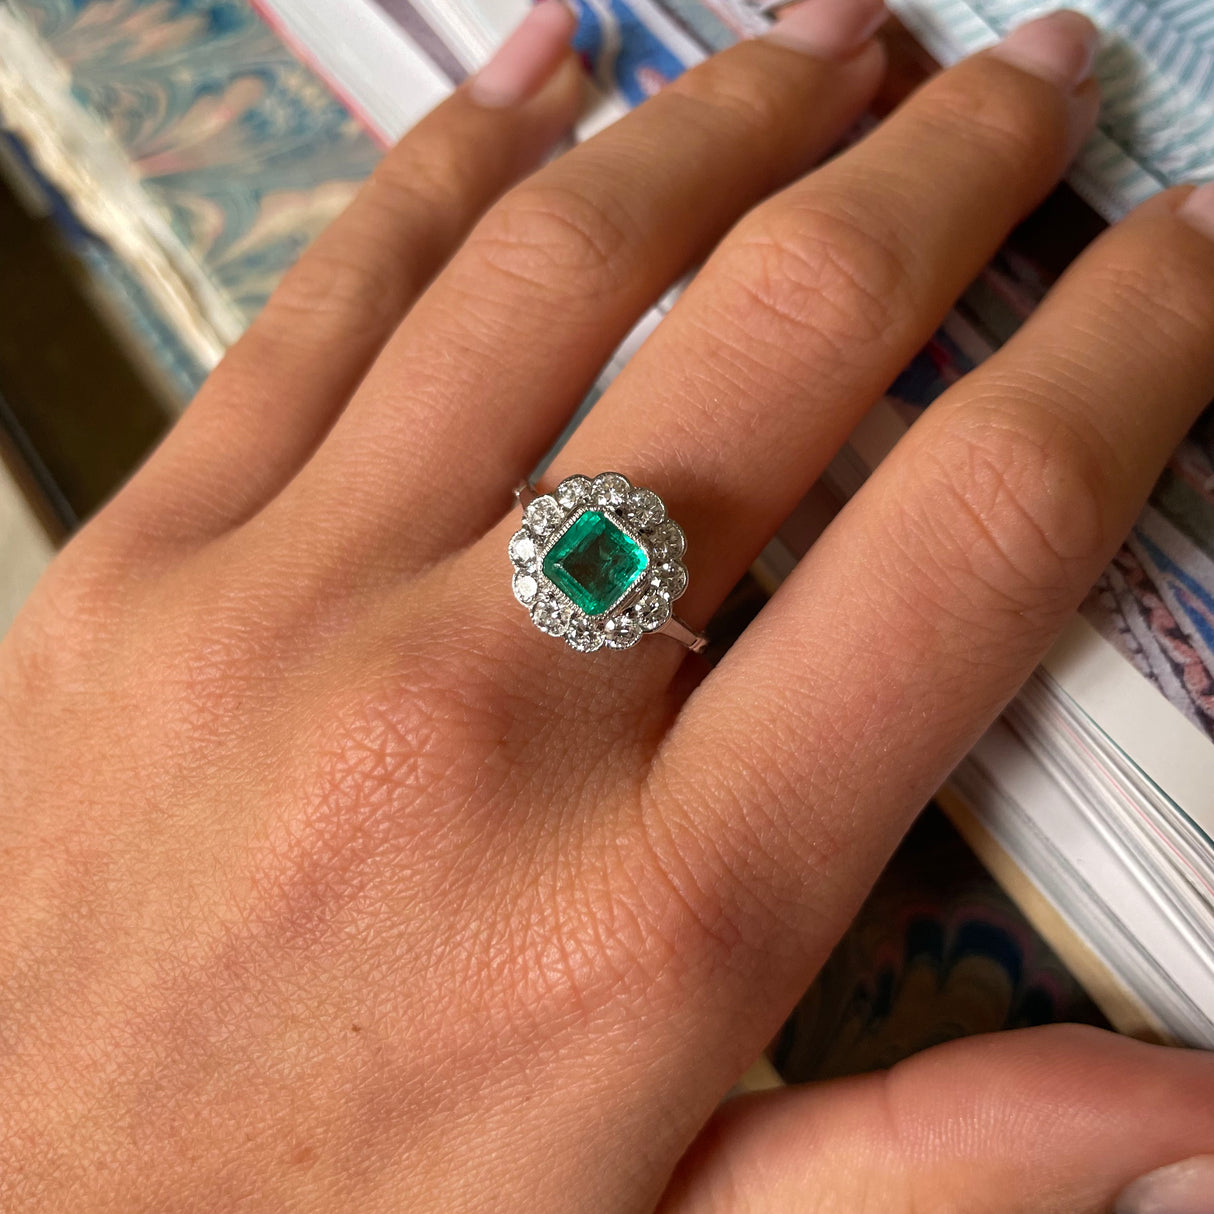 Edwardian emerald and diamond cluster ring, worn on hand.